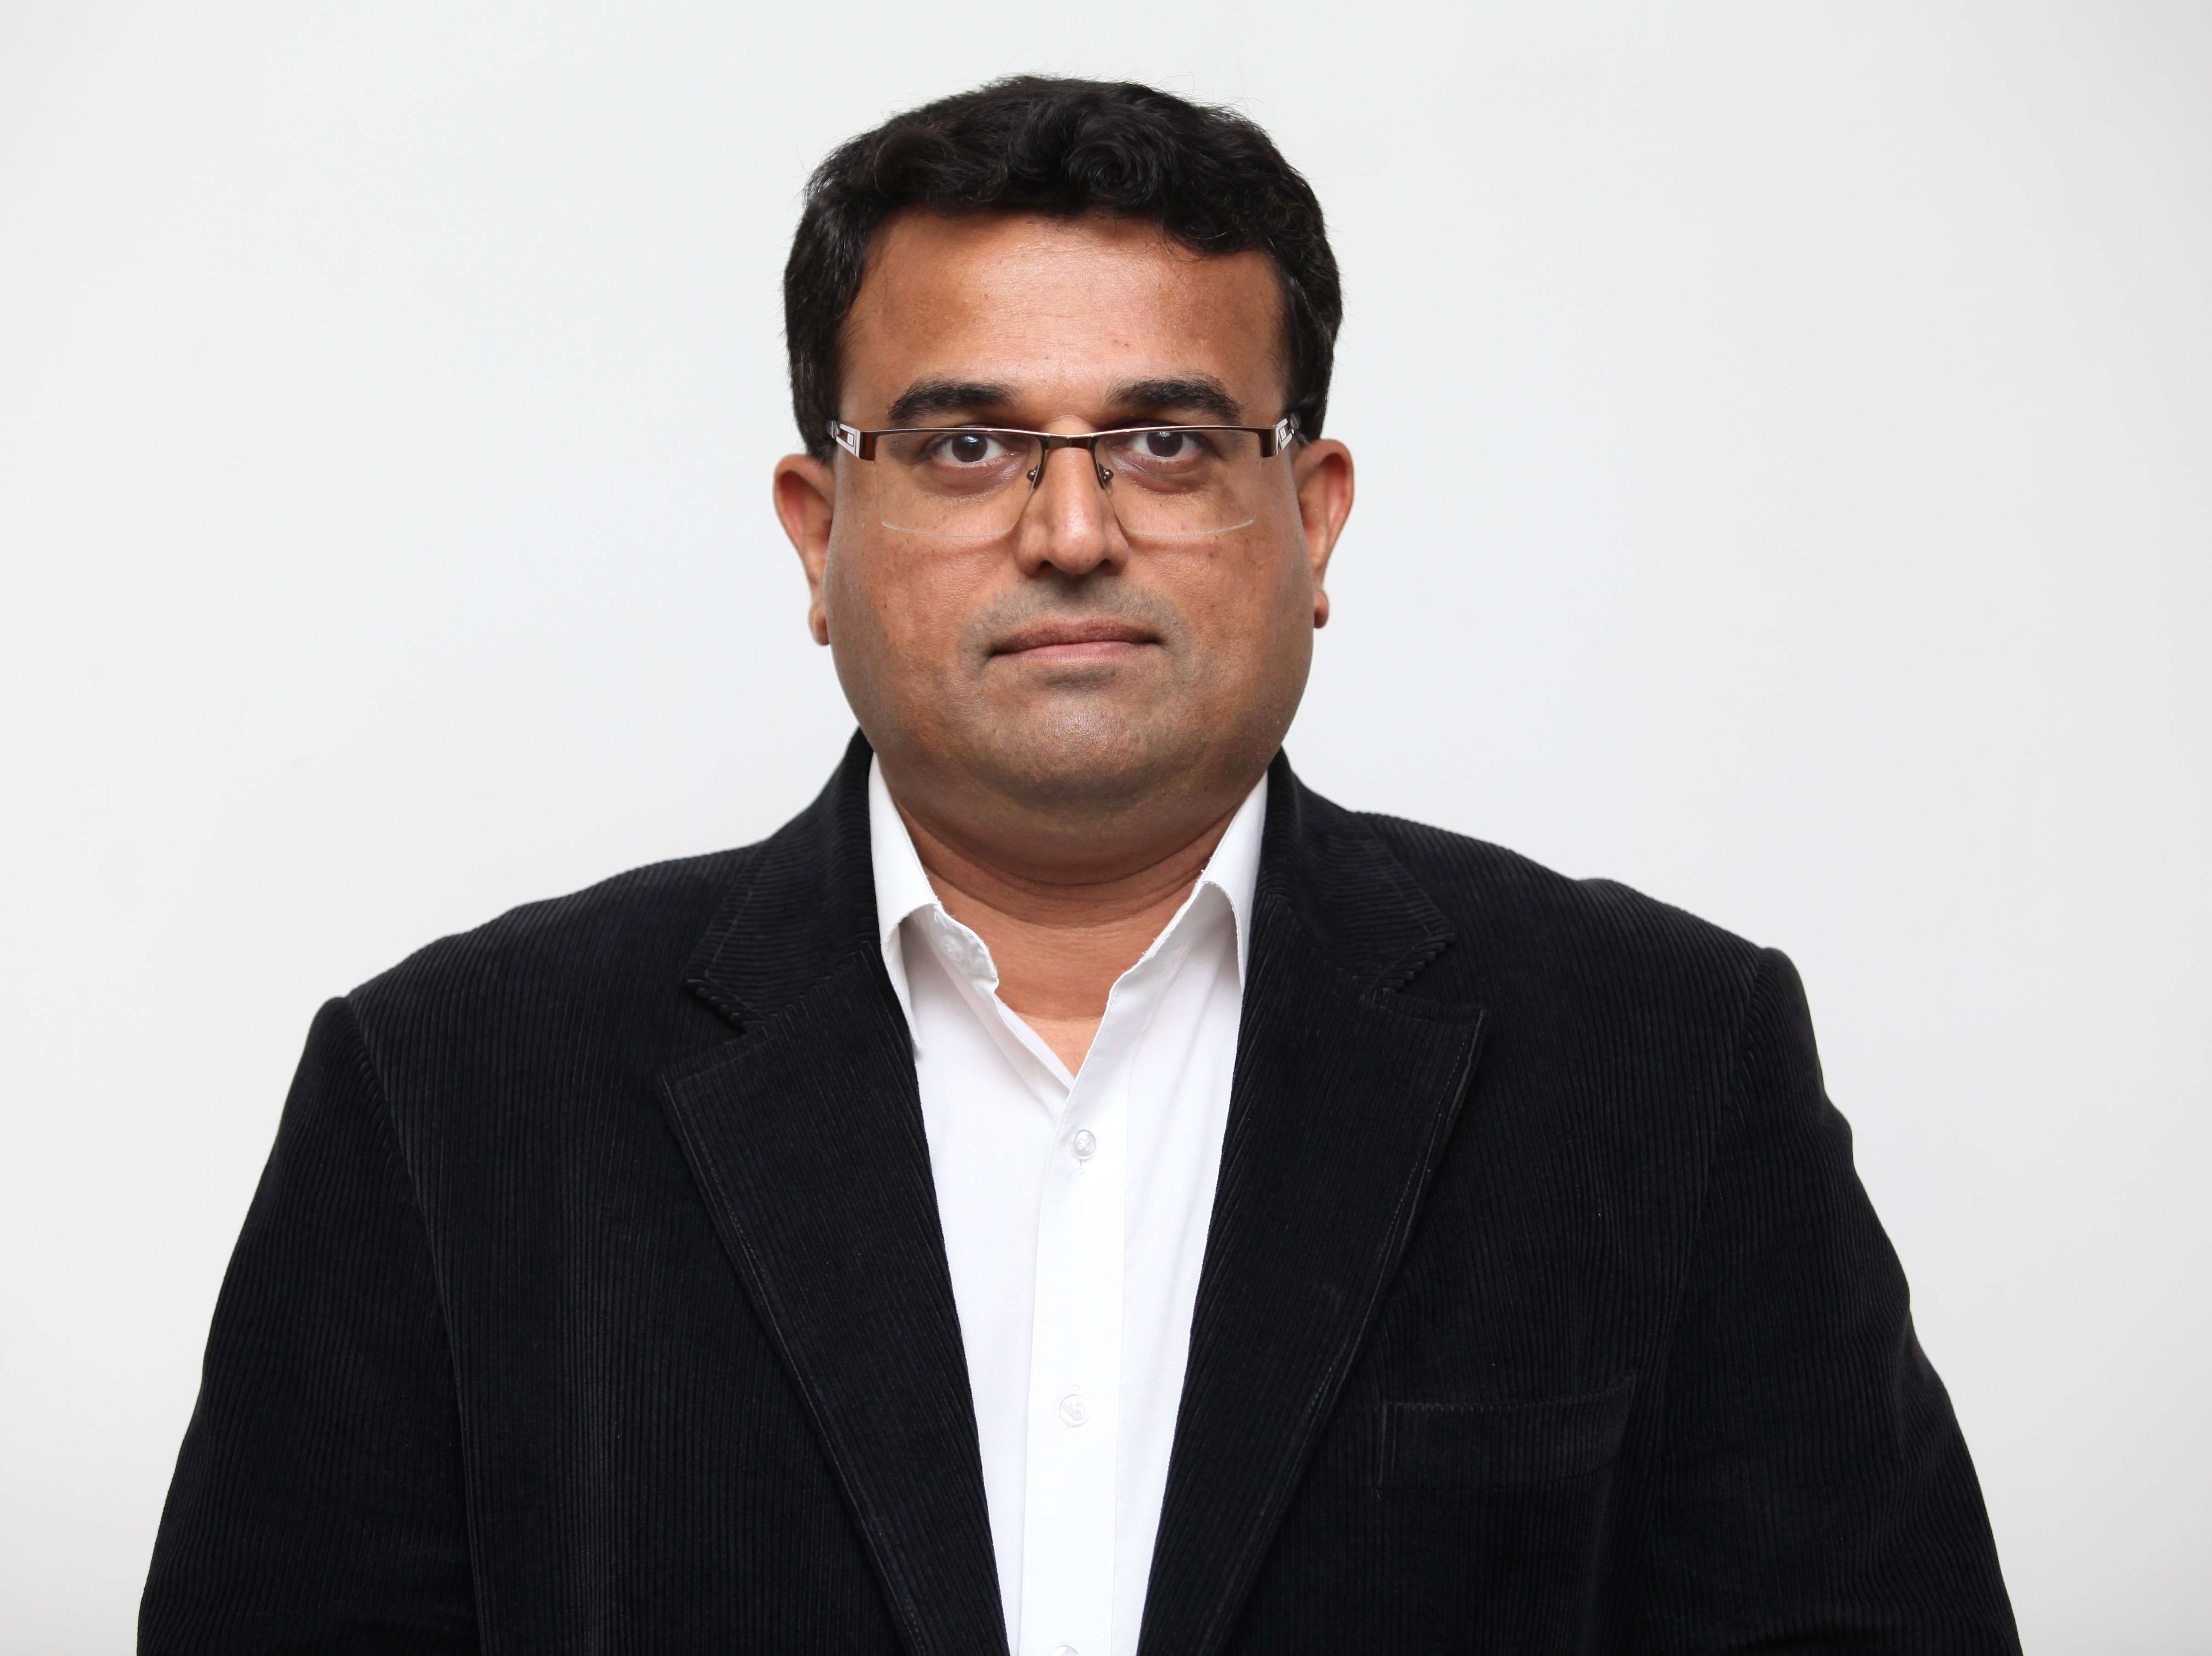 Sudhir Kanvinde, Executive Director IT of IPA, Ministry of Shipping moves on